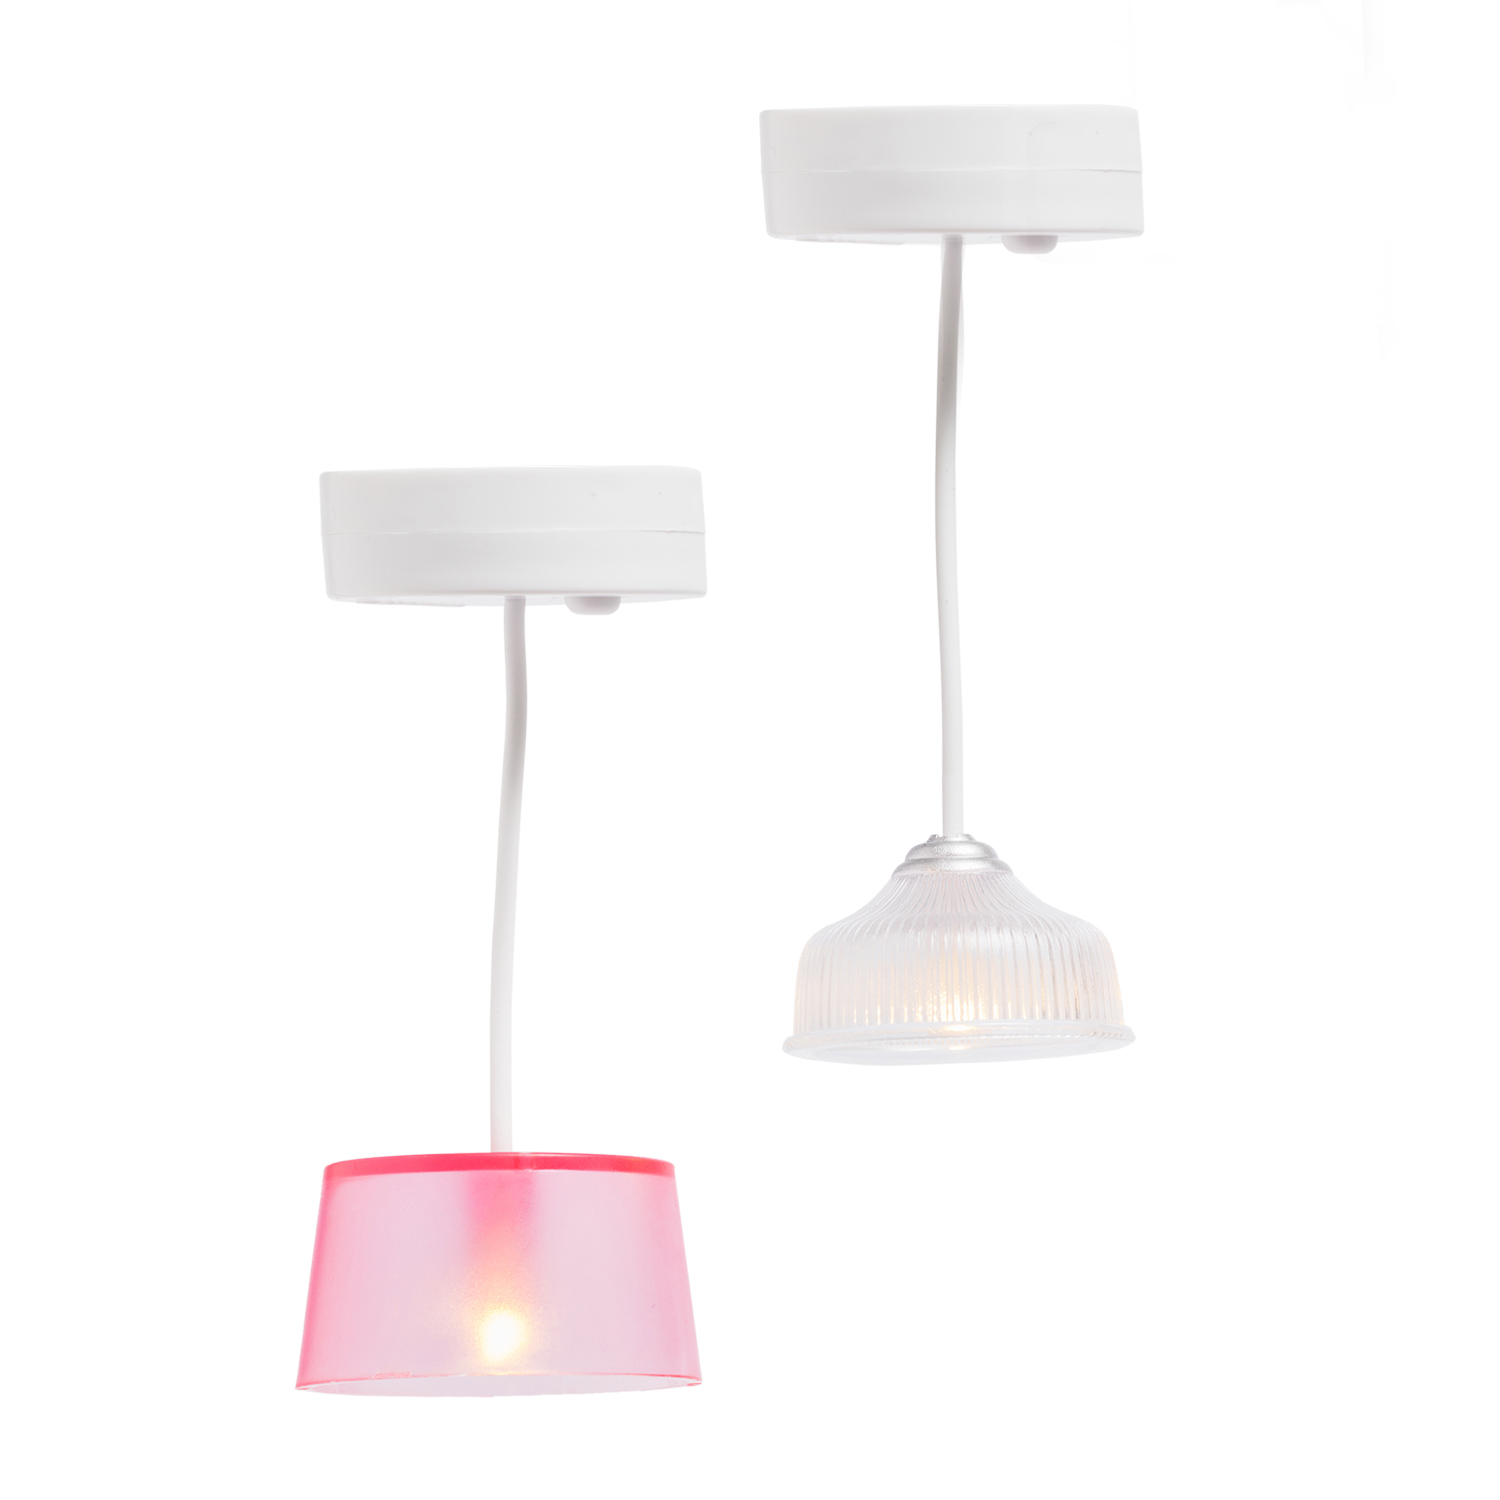 Lundby lundby doll house lighting 2 ceiling lamps